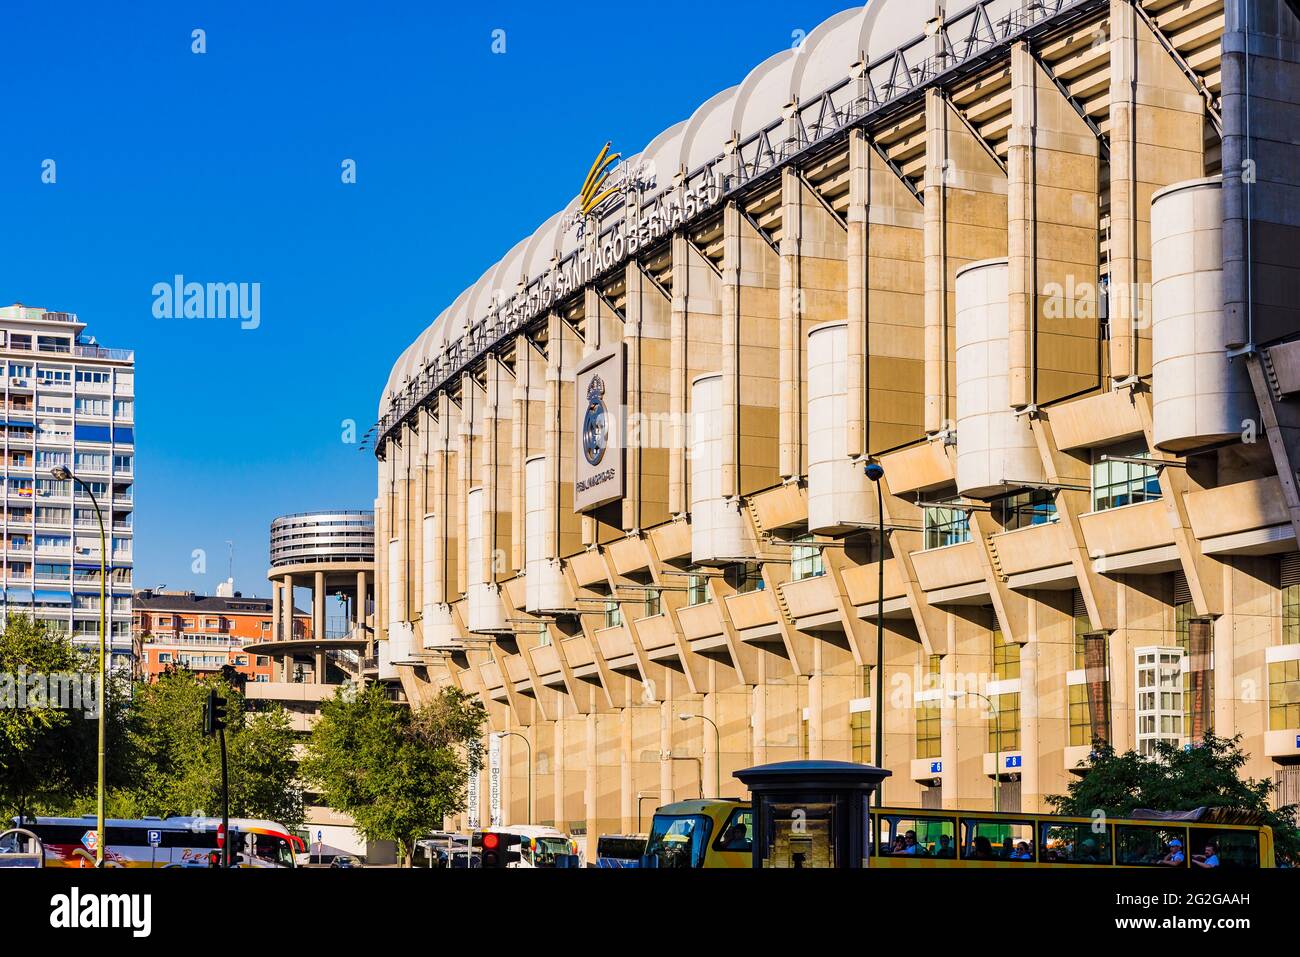 West external view of the stadium. The Santiago Bernabéu Stadium, Estadio Santiago Bernabéu, is a football stadium in Madrid. With a current seating c Stock Photo